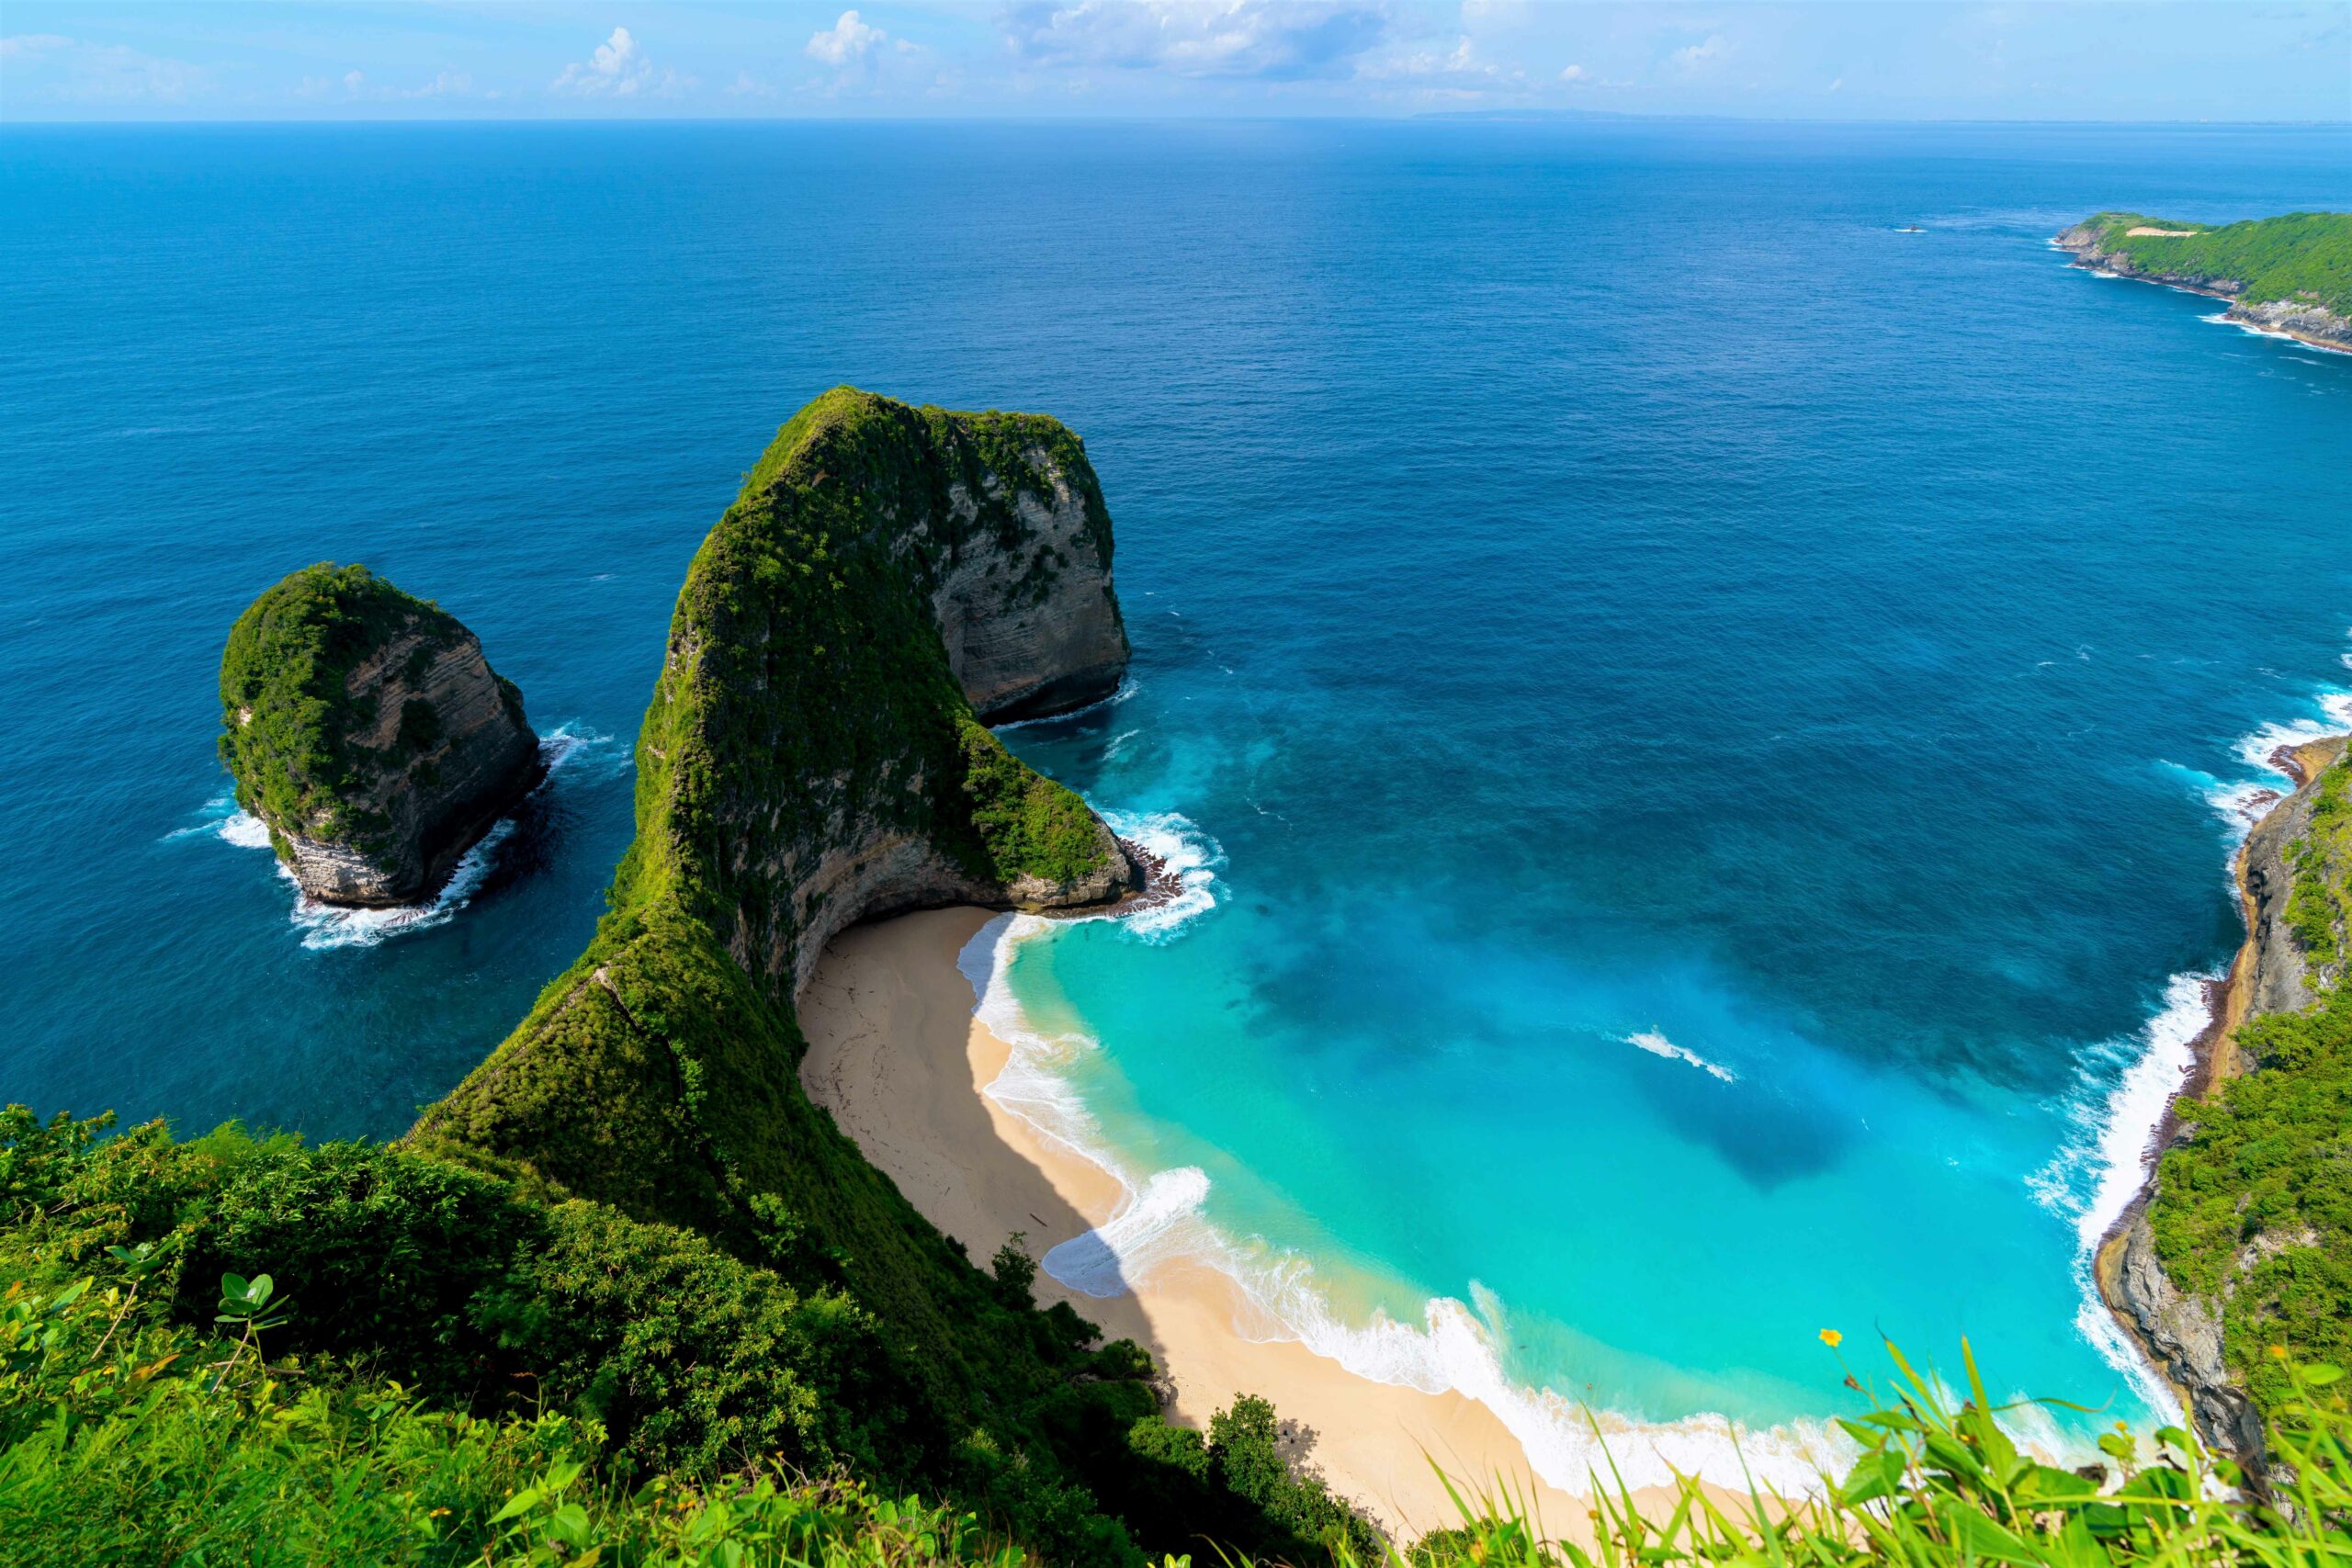 New Experience: Heaven of photography and water sports in Nusa Penida